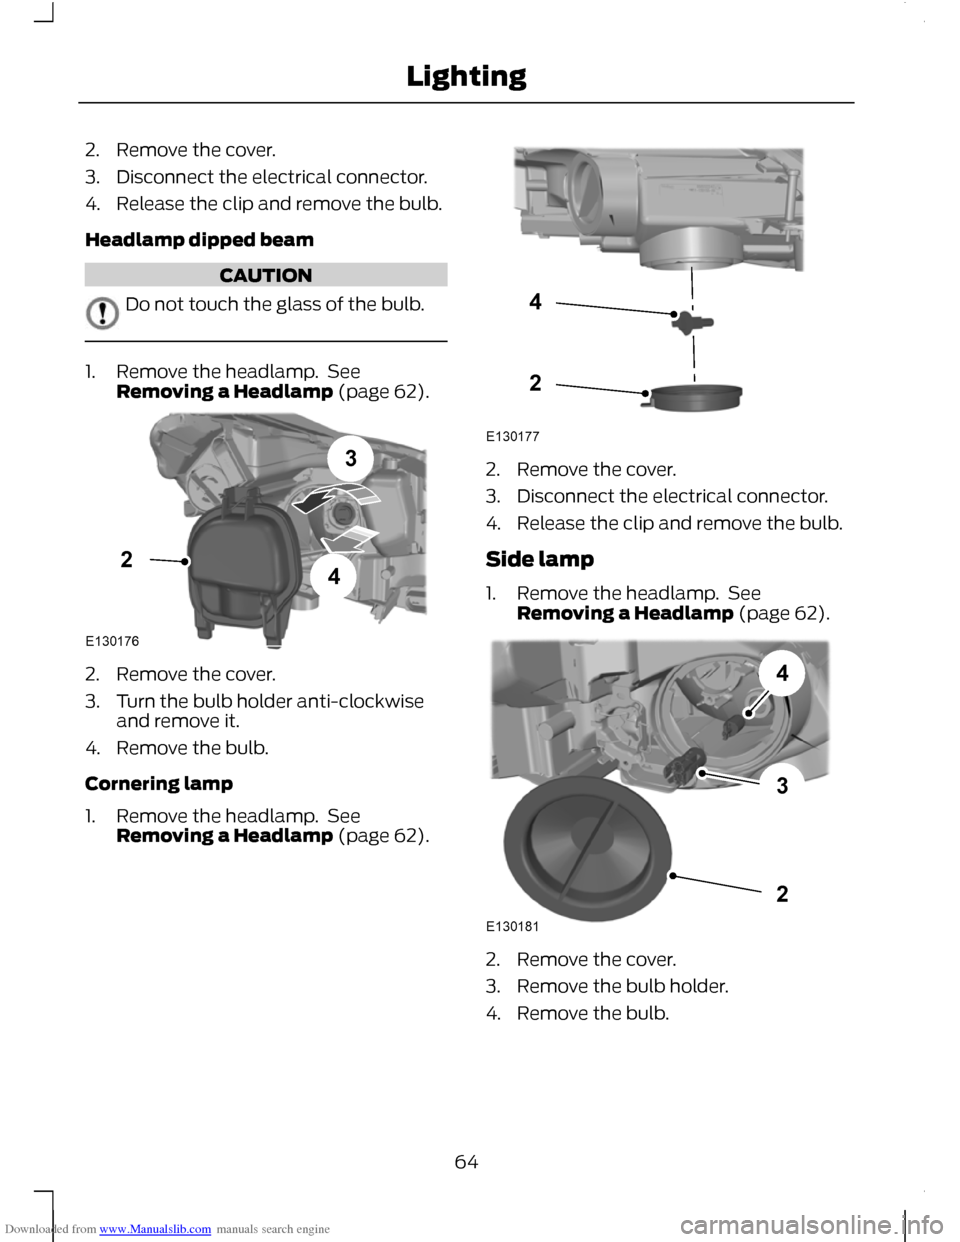 FORD C MAX 2011 2.G Owners Manual Downloaded from www.Manualslib.com manuals search engine 2. Remove the cover.
3. Disconnect the electrical connector.
4. Release the clip and remove the bulb.
Headlamp dipped beam
CAUTION
Do not touch